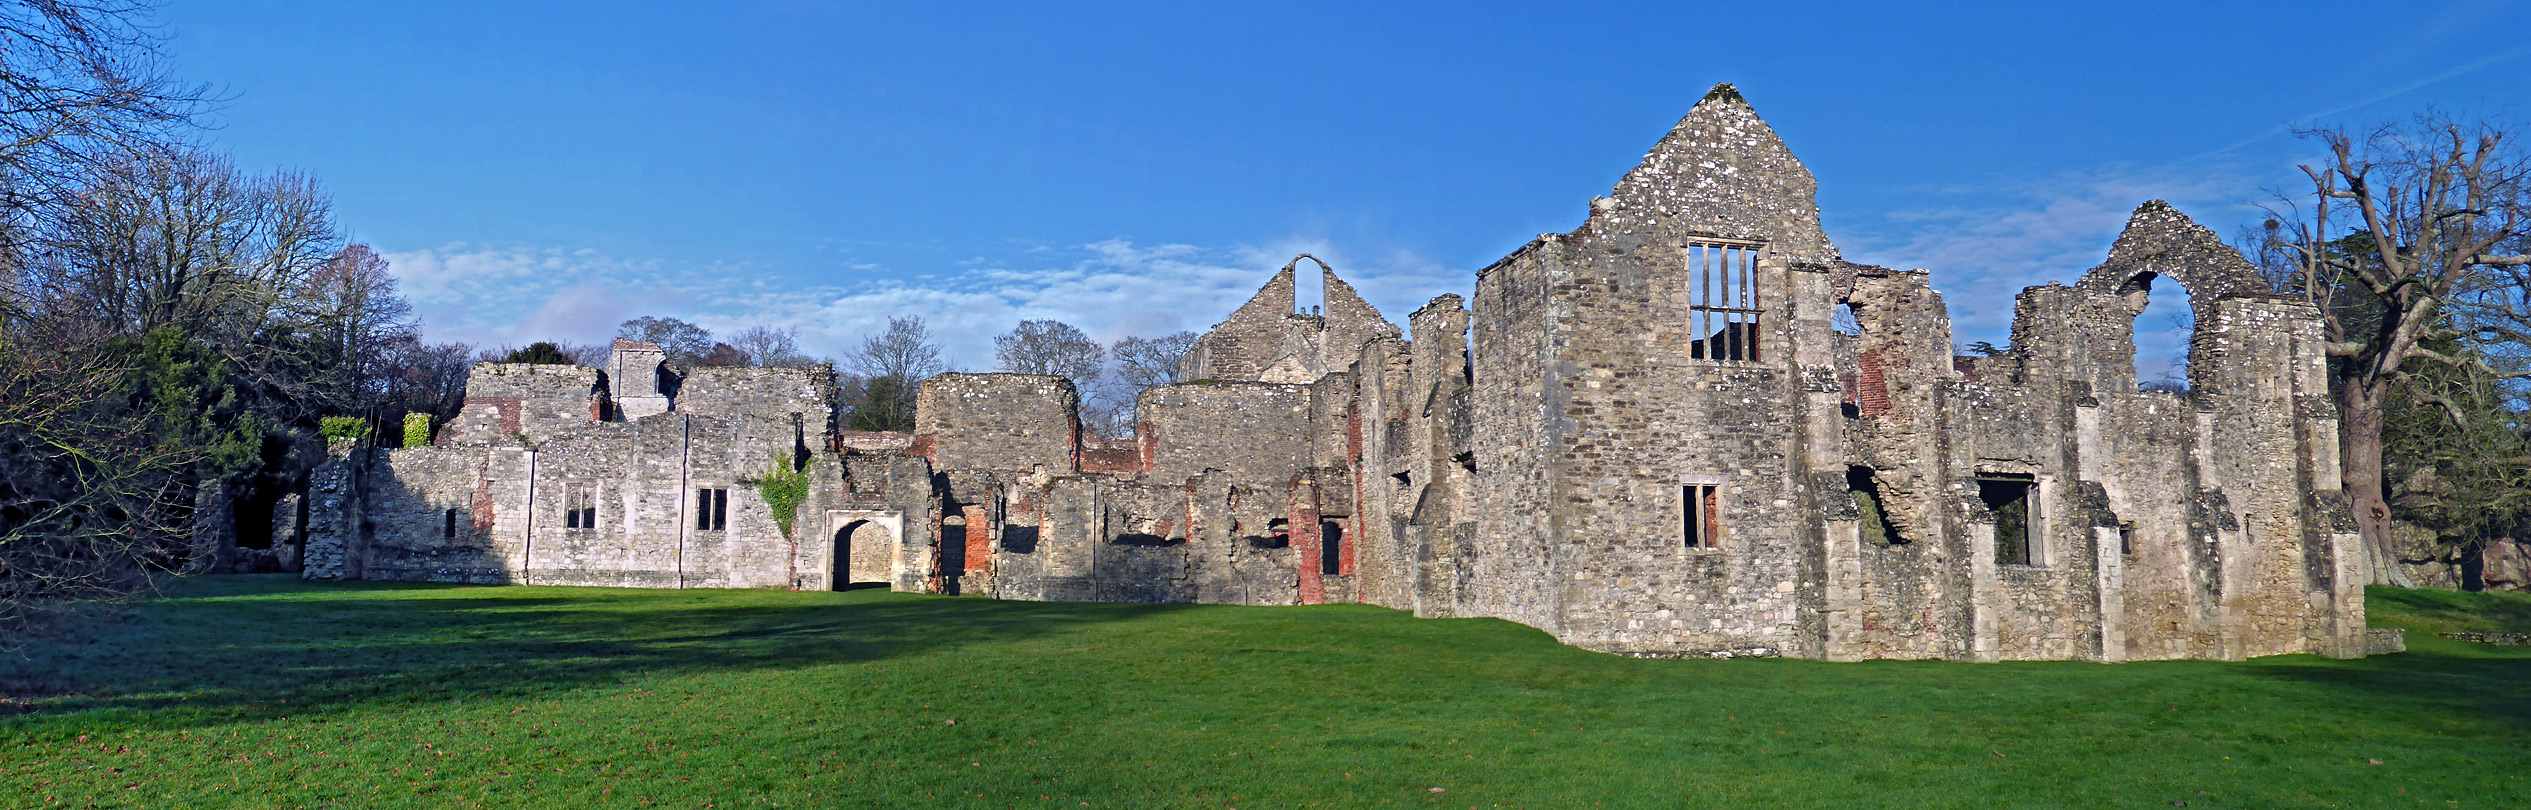 South side of the abbey buildings